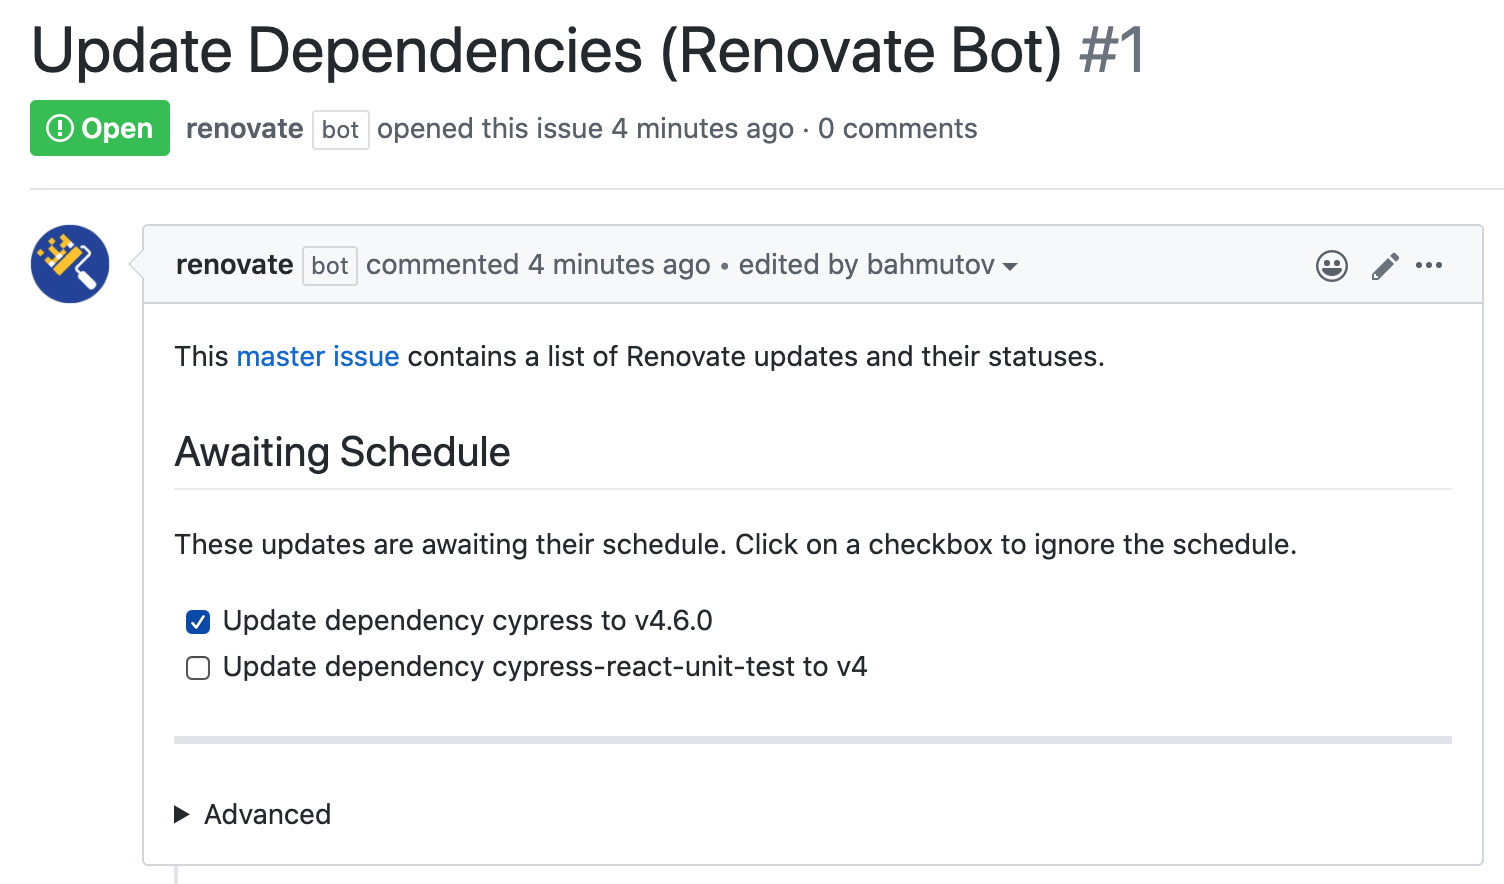 Click checkbox next to the dependency to update